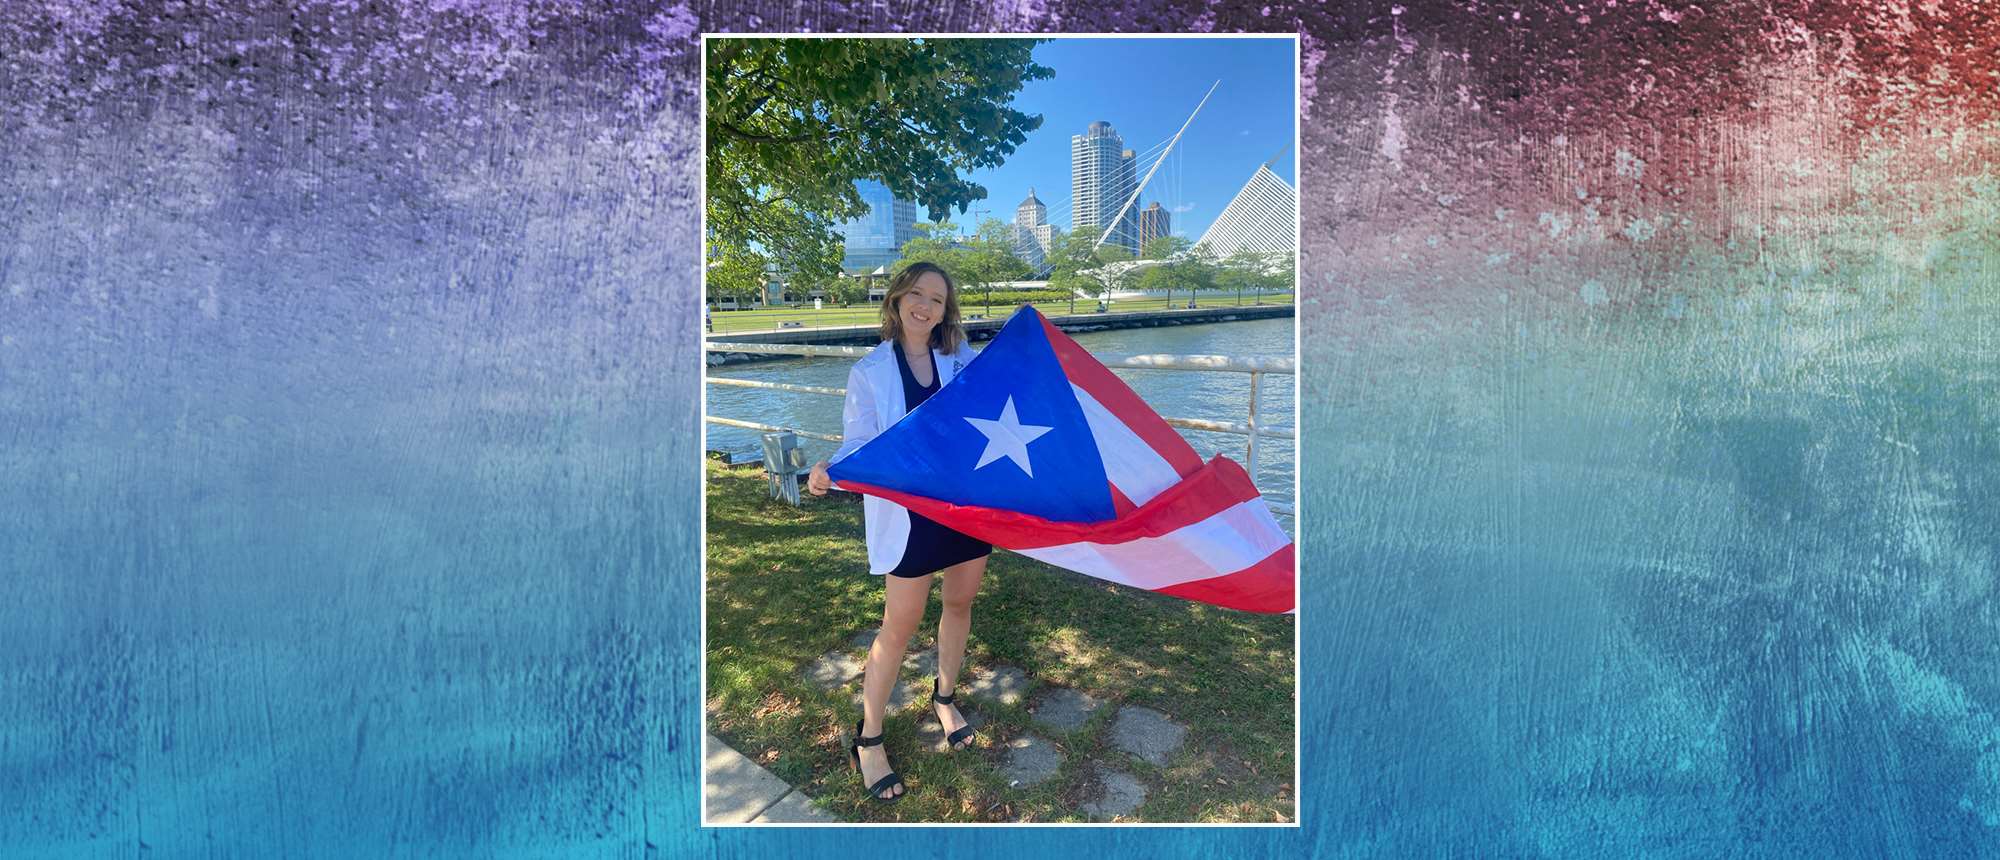 MCW student reconnects with her island homeland through new global research partnership